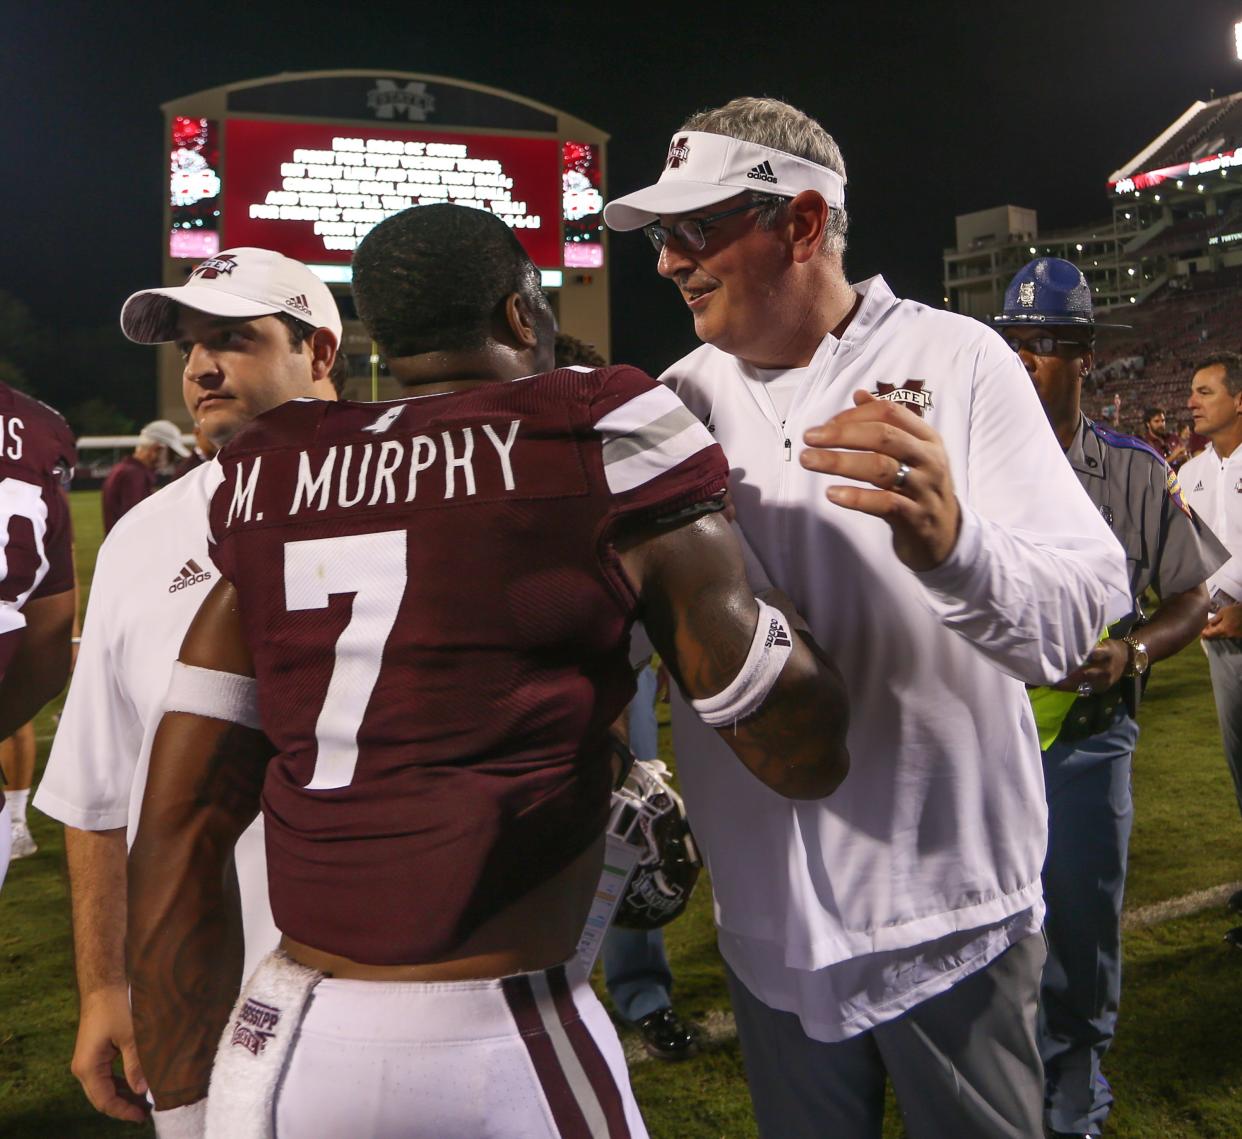 Mississippi State's Marcus Murphy (7) and Mississippi State head coach Joe Moorhead embrace following the win. Mississippi State played Stephen F. Austin in the 2018 football season opener at Davis-Wade Stadium in Starkville on September 1, 2018. Photo by Keith Warren/Mandatory Credit